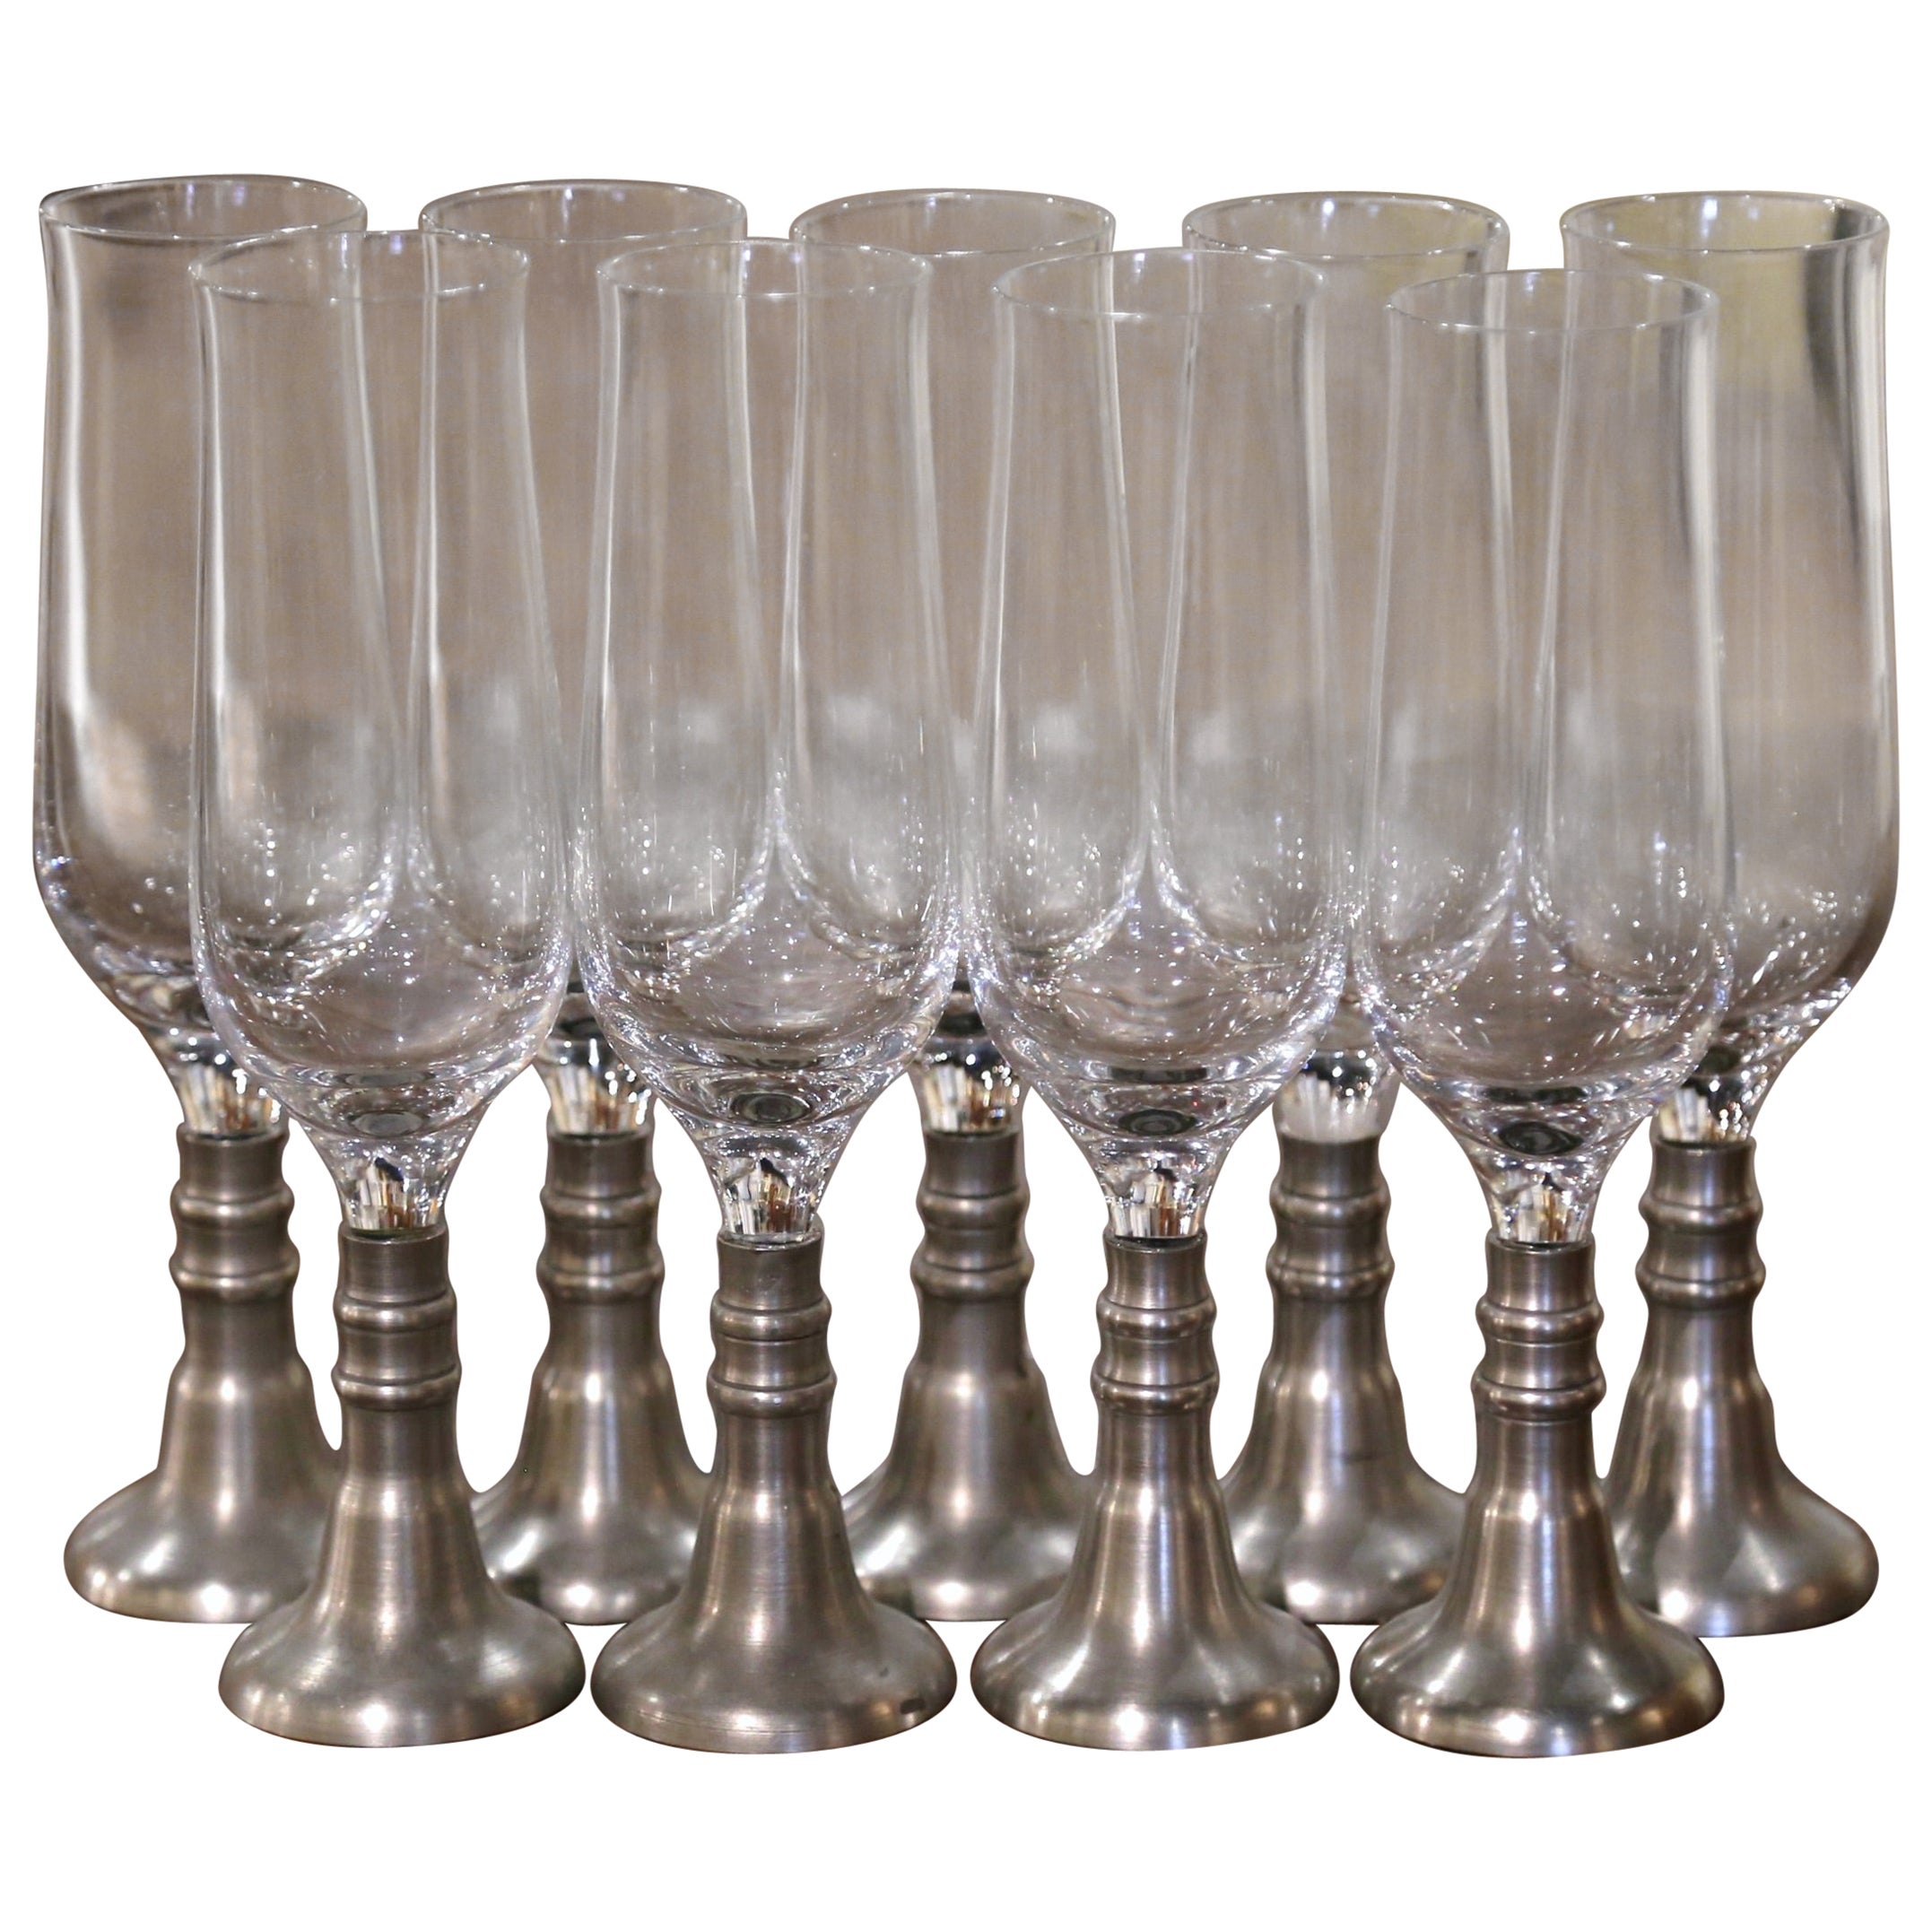 Set of 9 Vintage French Pewter and Glass Champagne Flutes